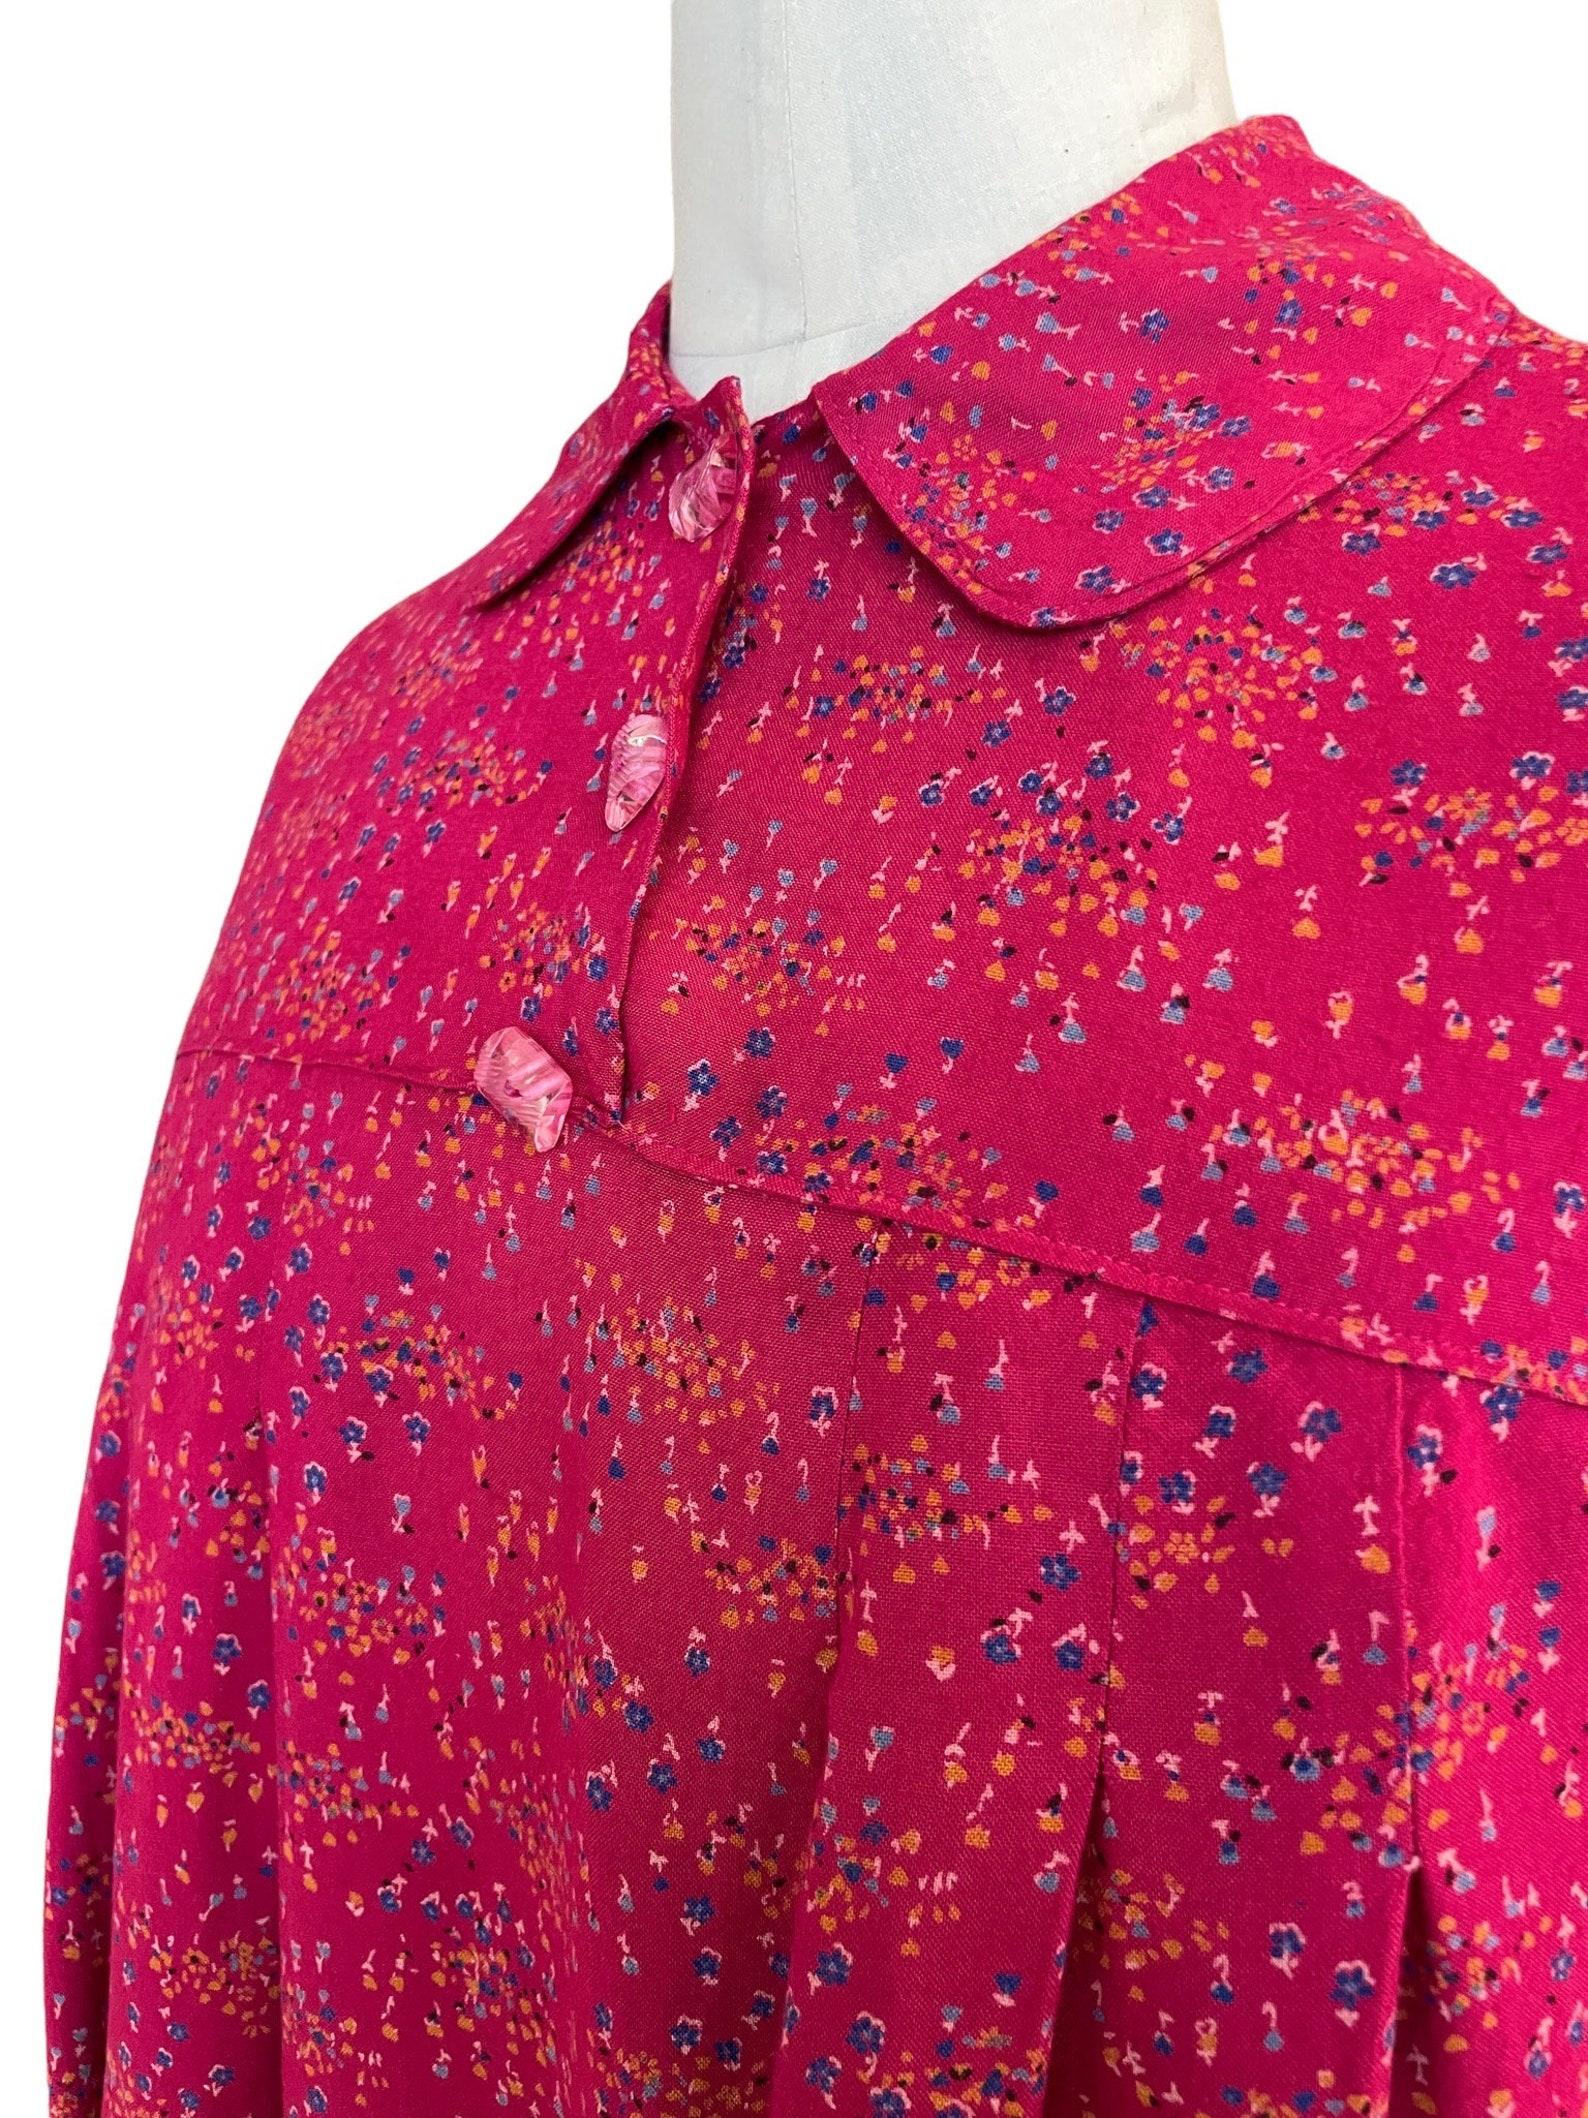 Raspberry Pink Floral Trapeze Dress, Circa 1970s For Sale 6